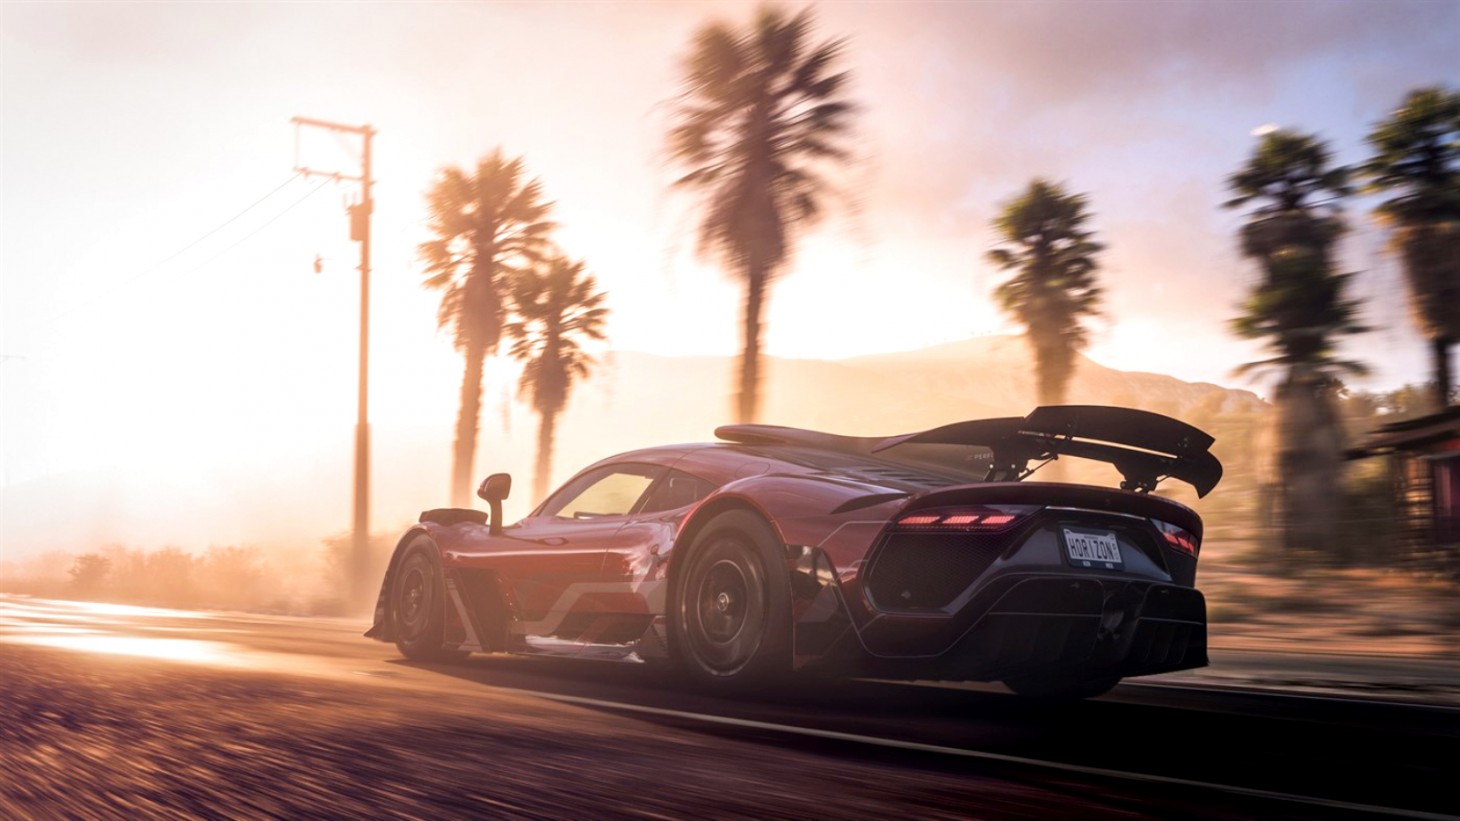 Playground Games details everything coming in the Forza Horizon 5 10-Year  Anniversary celebration